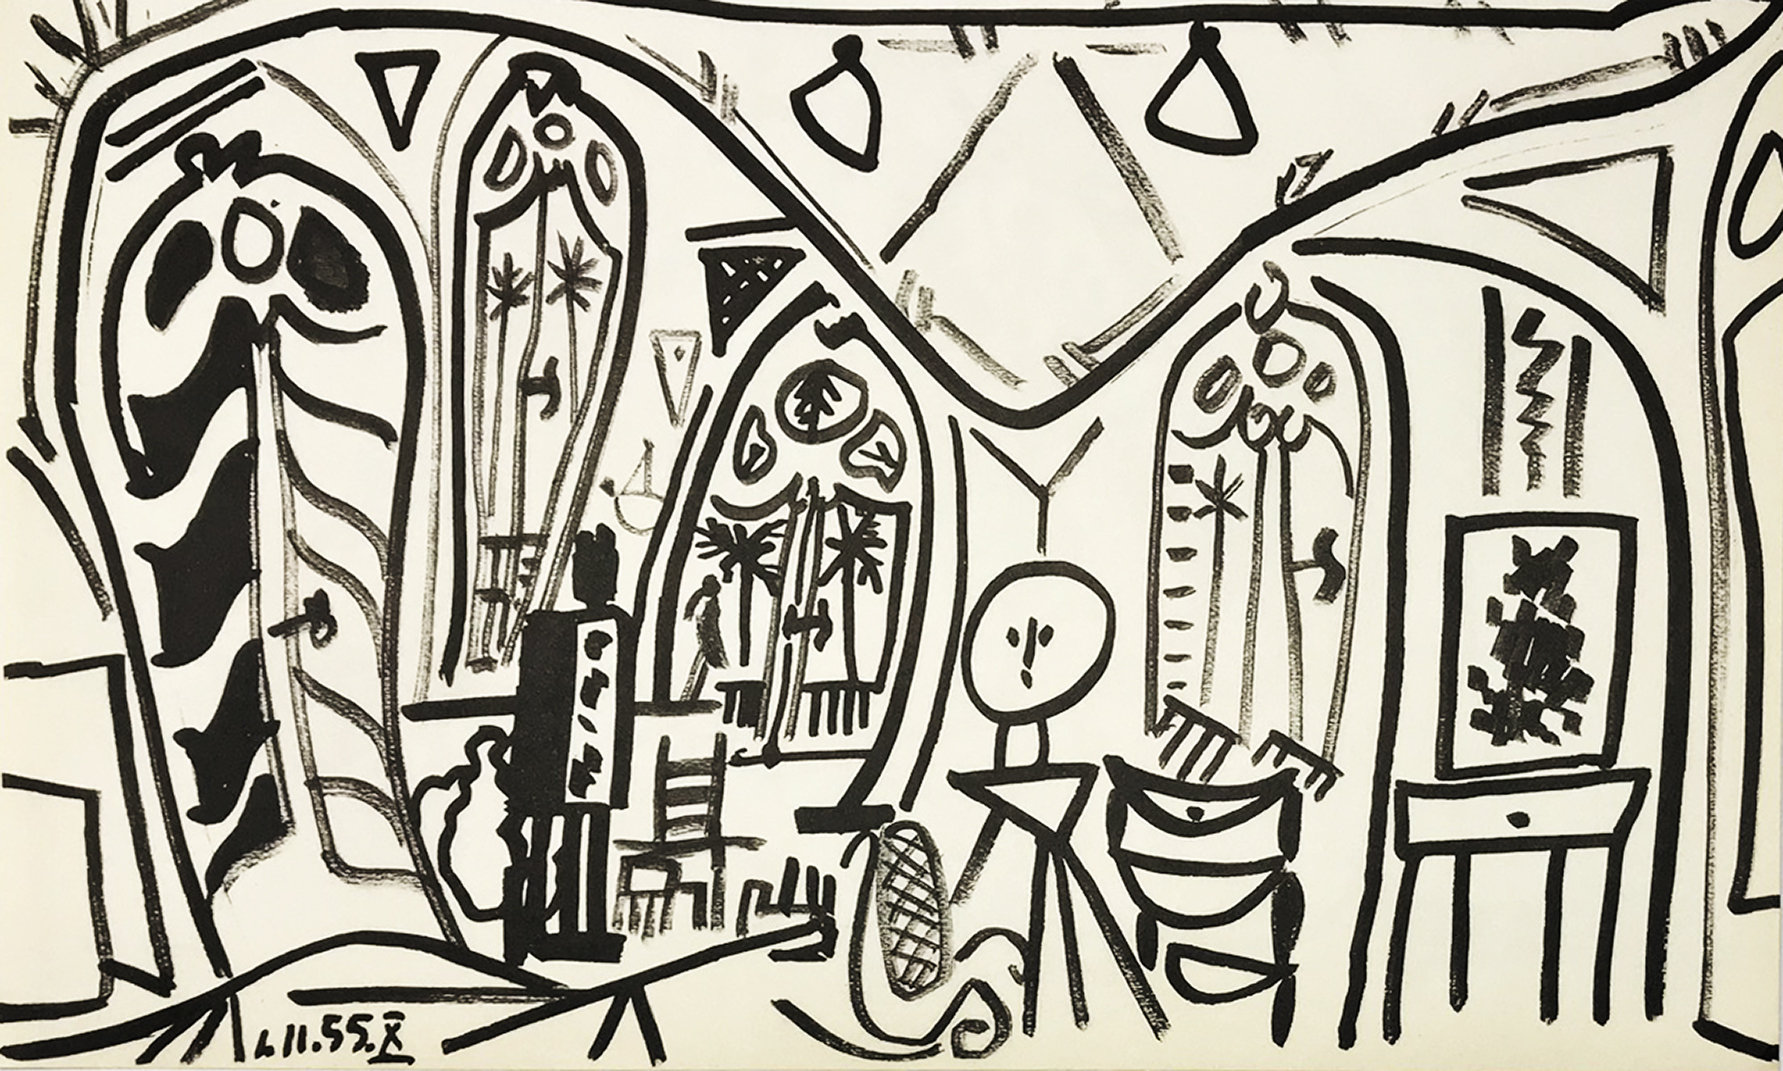 Picasso Sketchbook Lithograph No 10, dated 1/11/1955